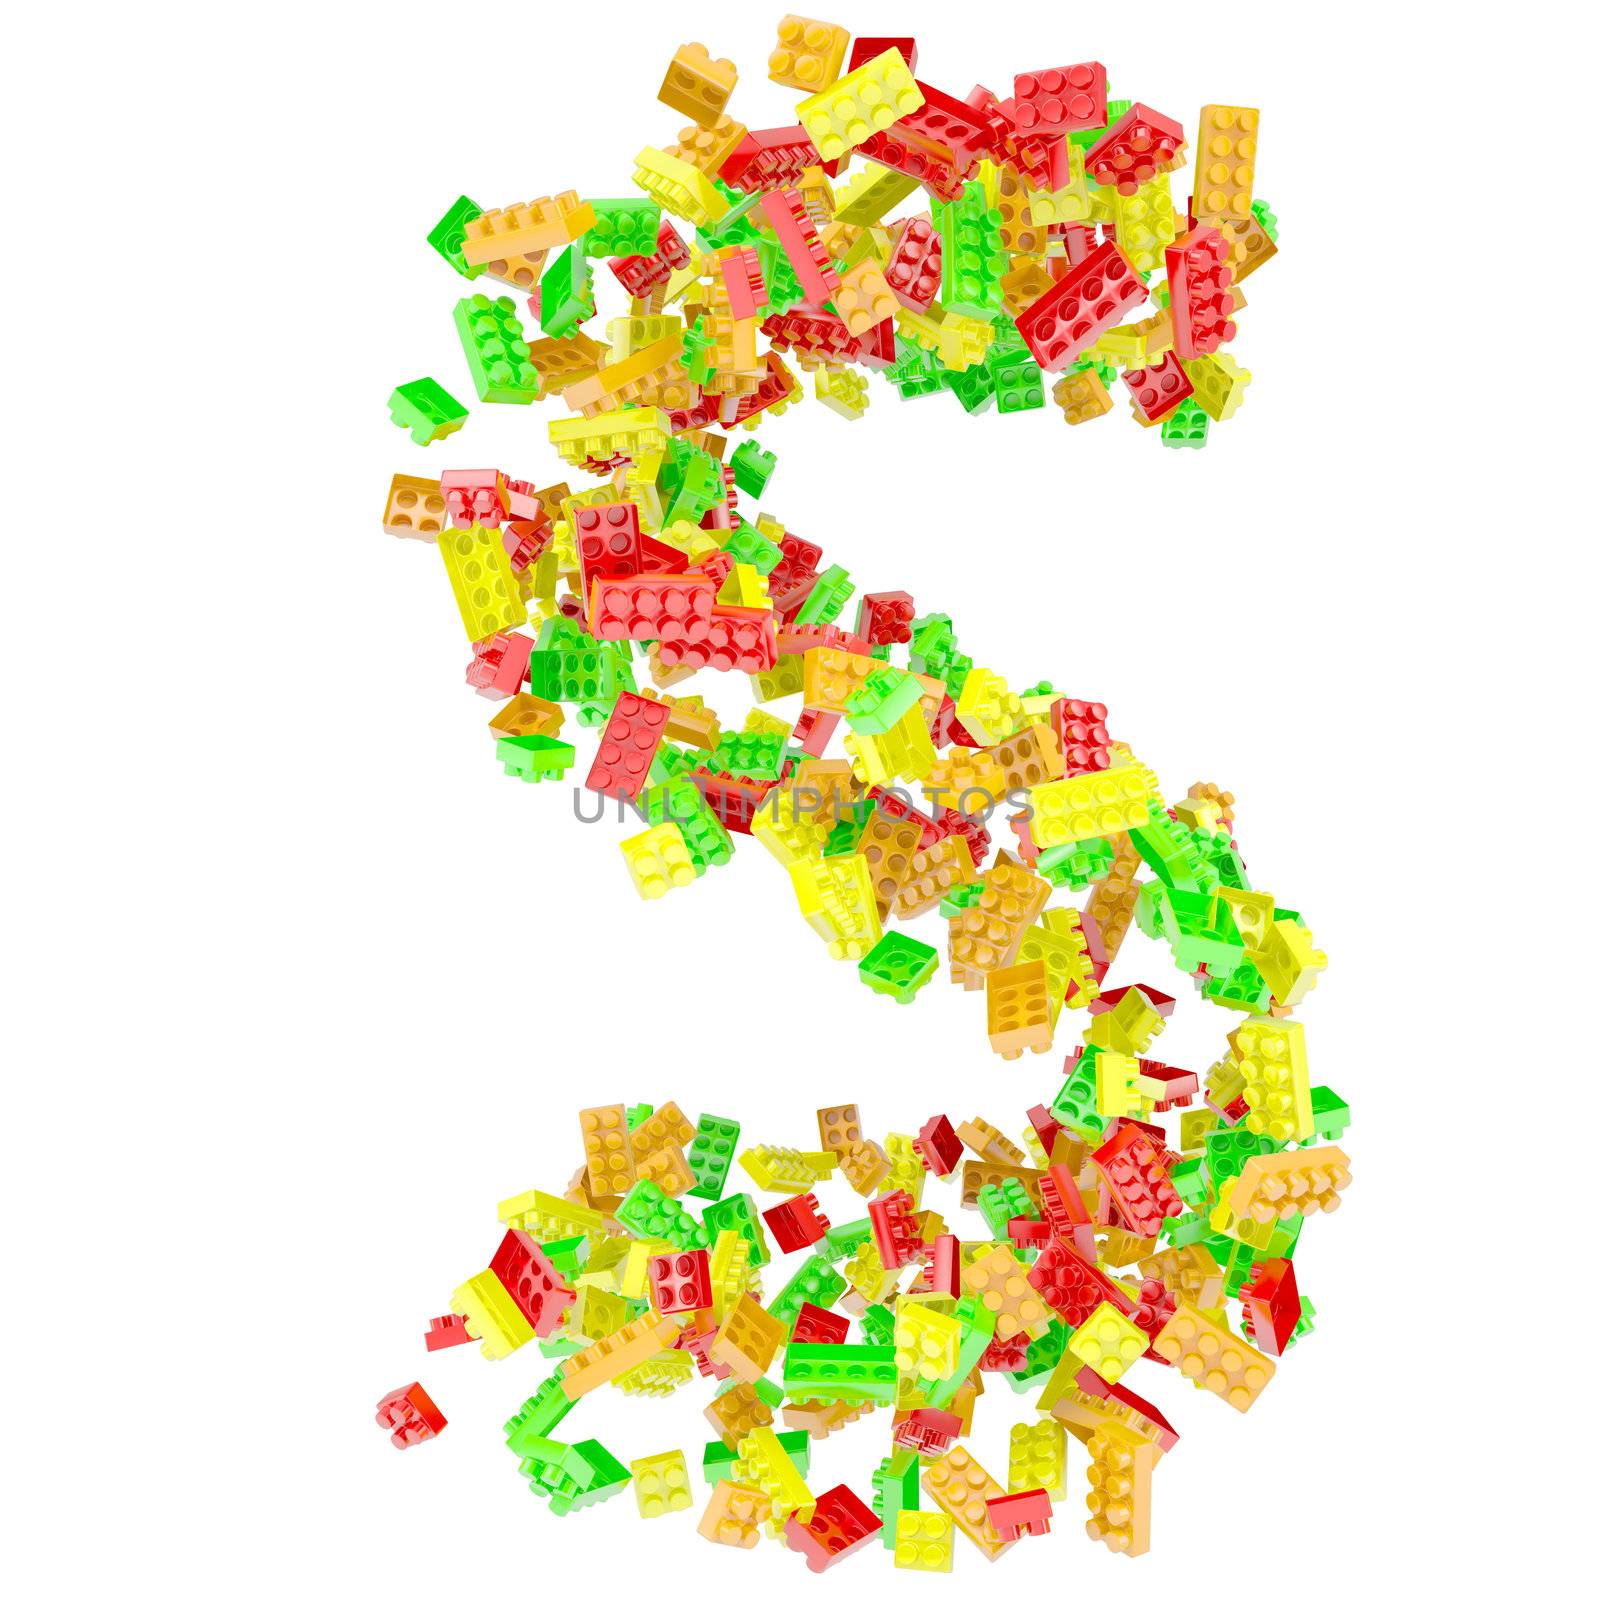 The letter S is made up of children's blocks by cherezoff